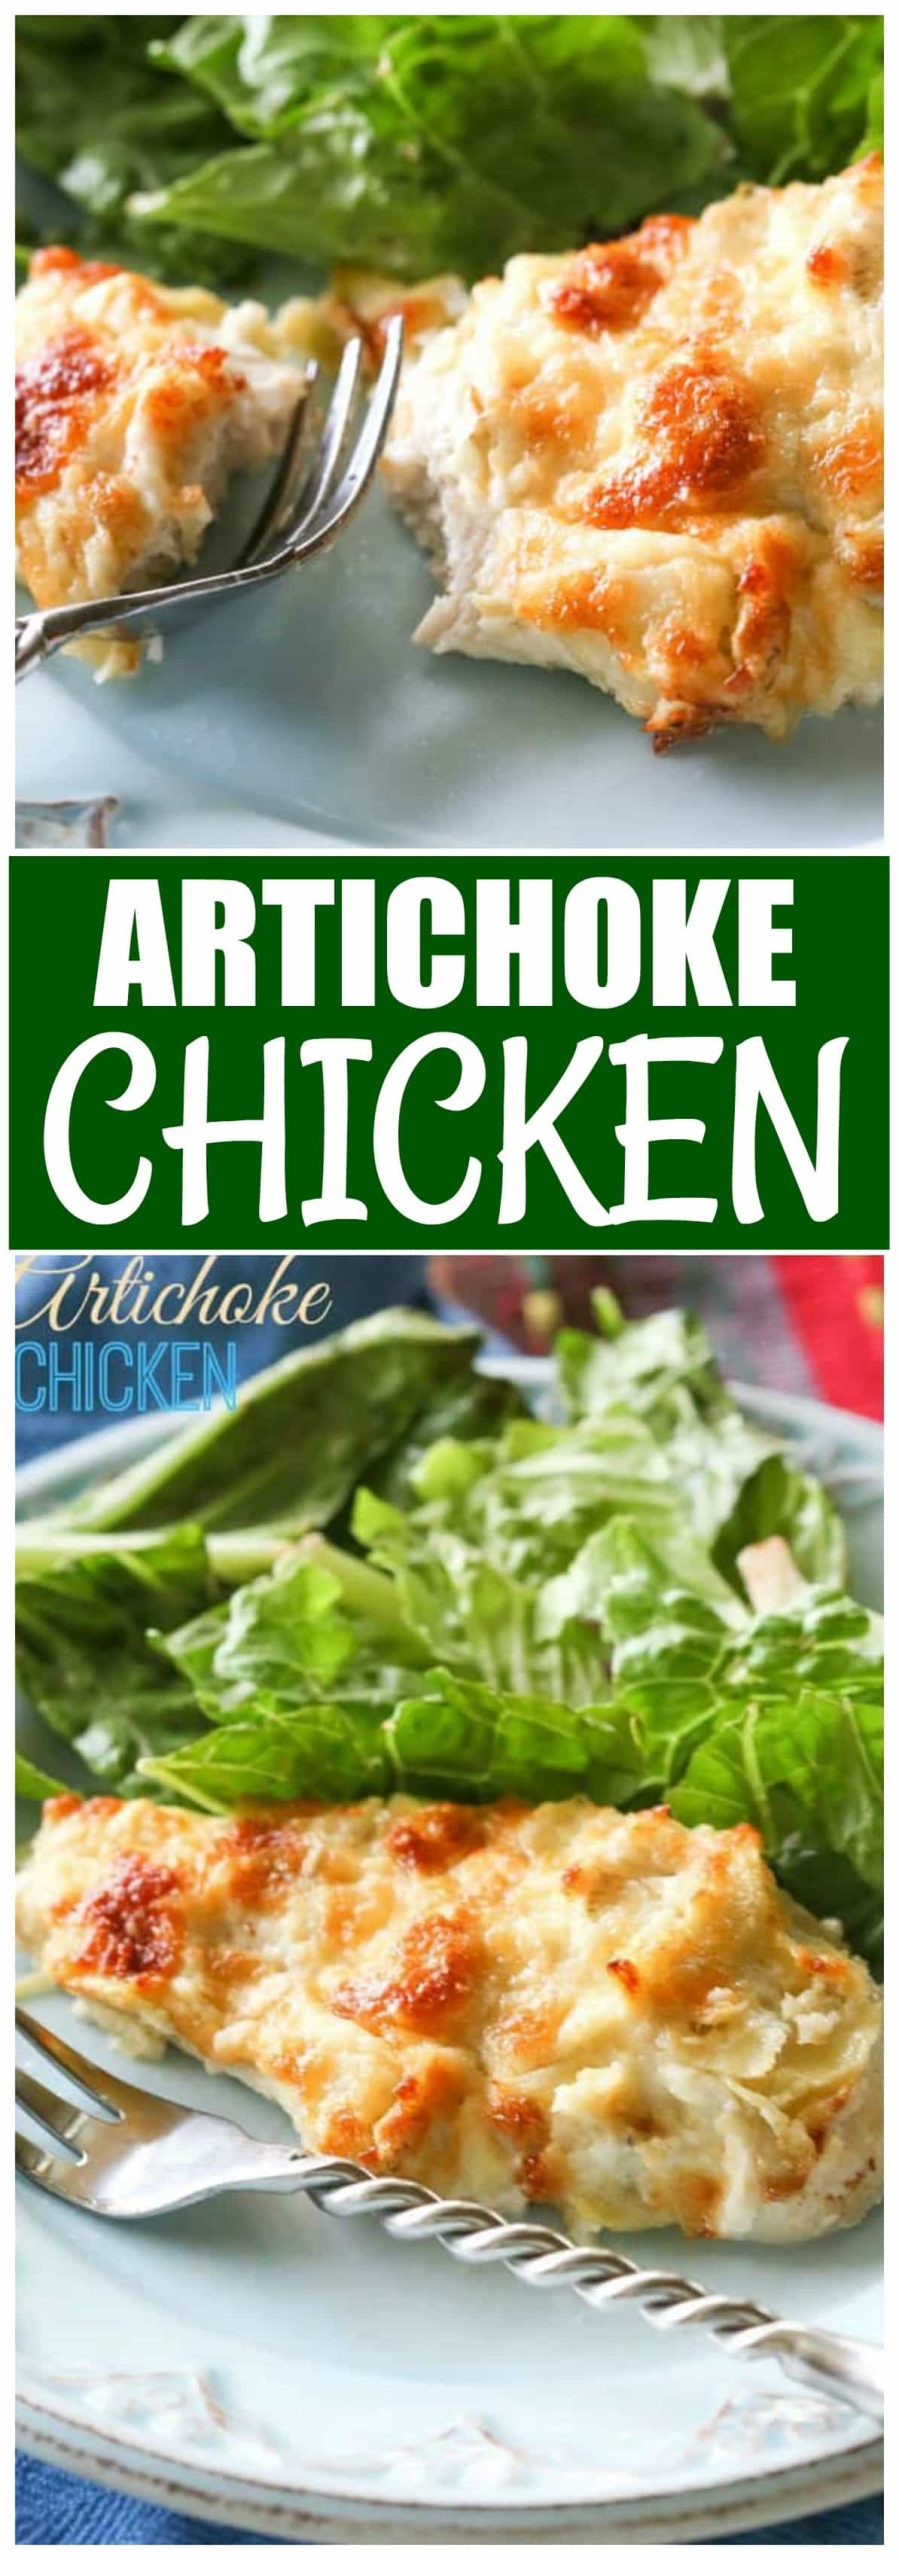 This Artichoke Chicken is a simple and easy meal that is delicious! It tastes like artichoke dip on top of chicken. #artichoke #chicken #dinner #easy #recipe